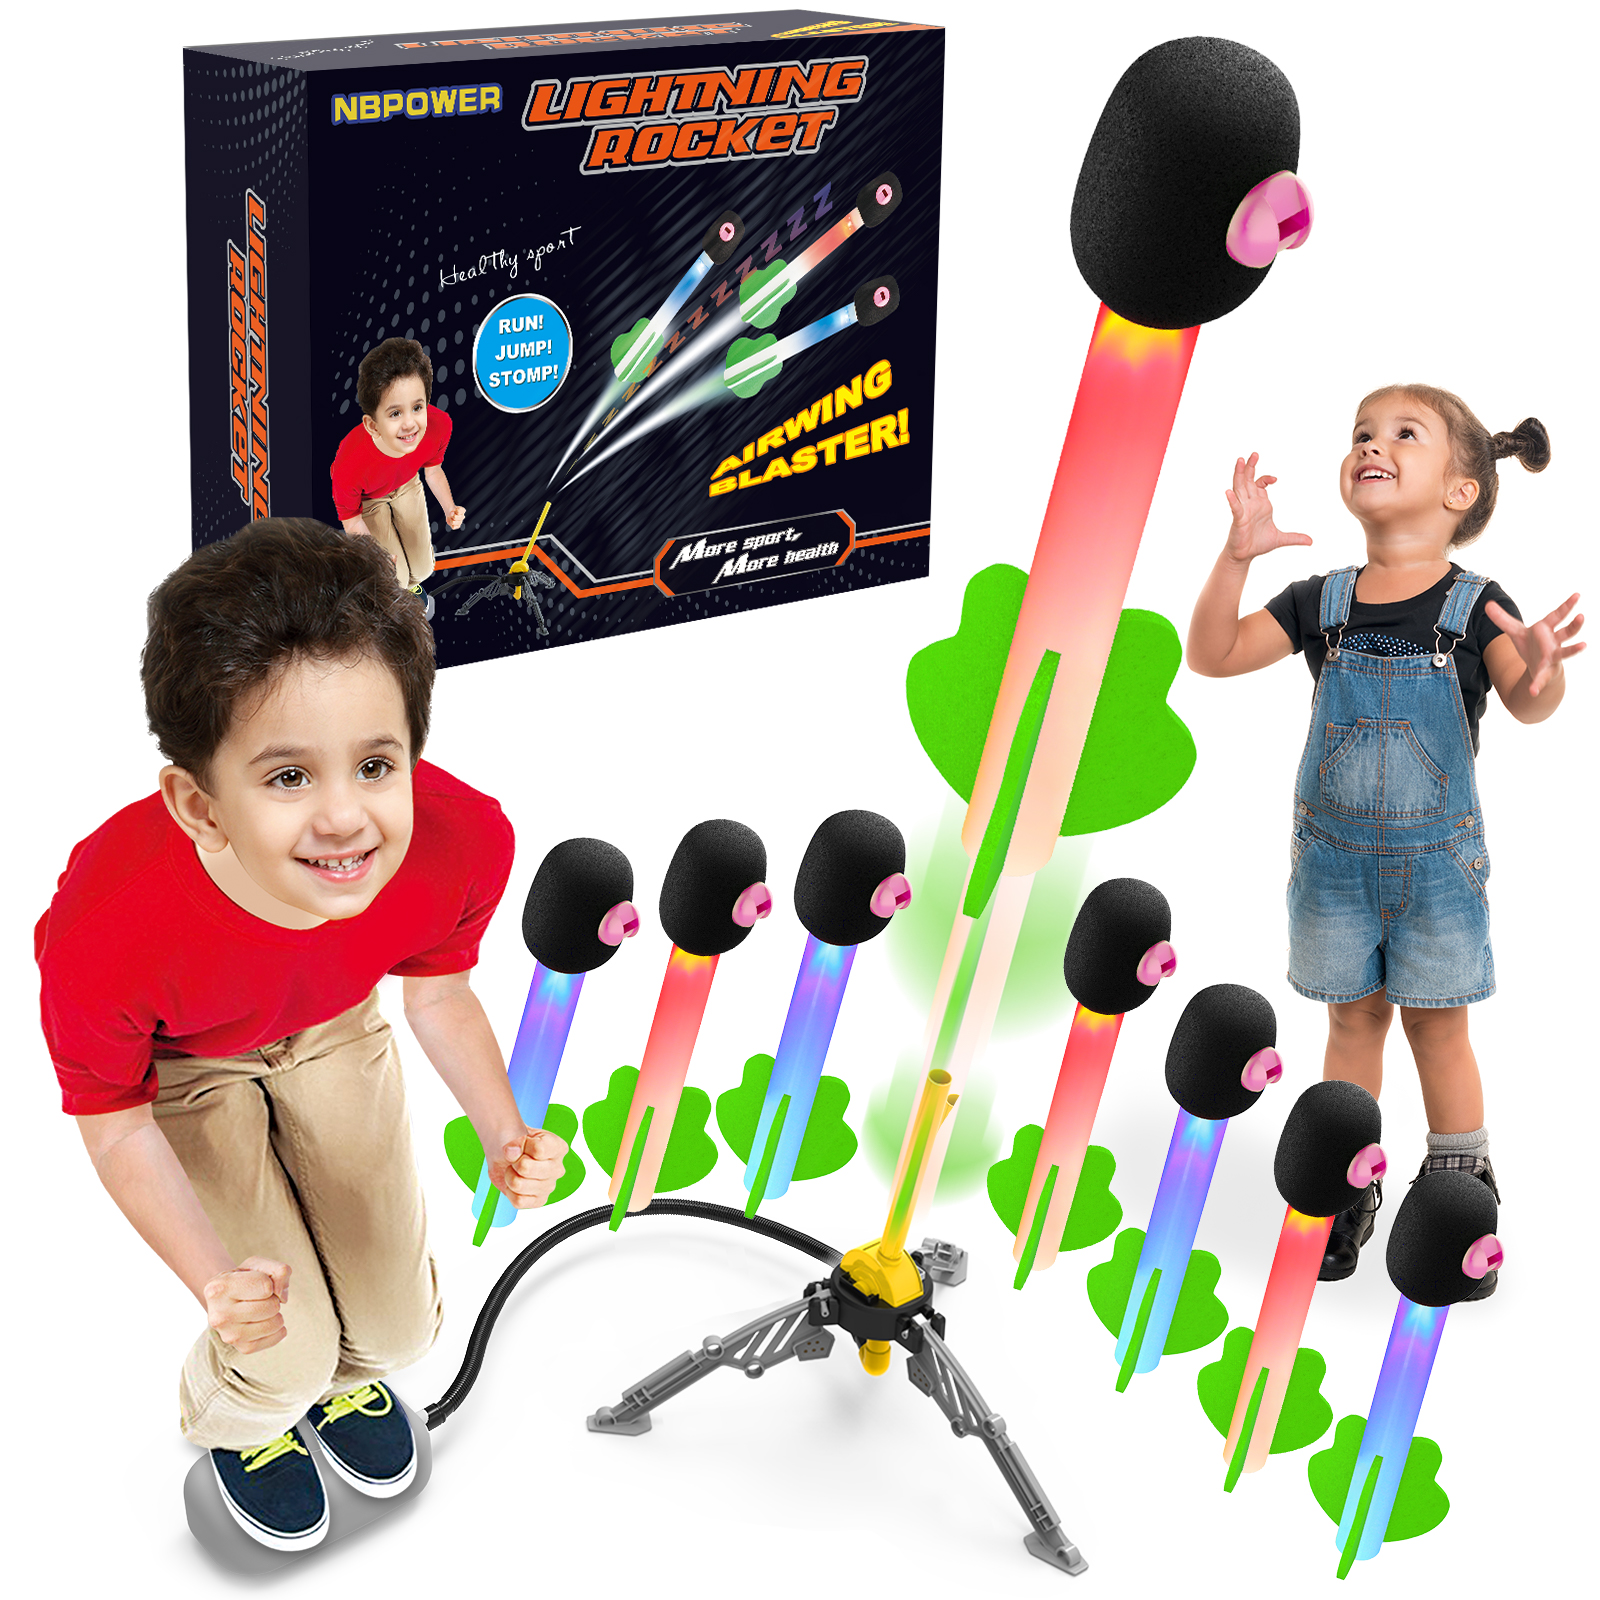 NBPOWER 8 Foam Lighting Rocket Launchers for Kids Reach Up to 100 Feet, Outdoor Air Jump Rocket Toy Gift for Boys and Girls Ages 3 4 5 6 7 8+ Years Old and Up